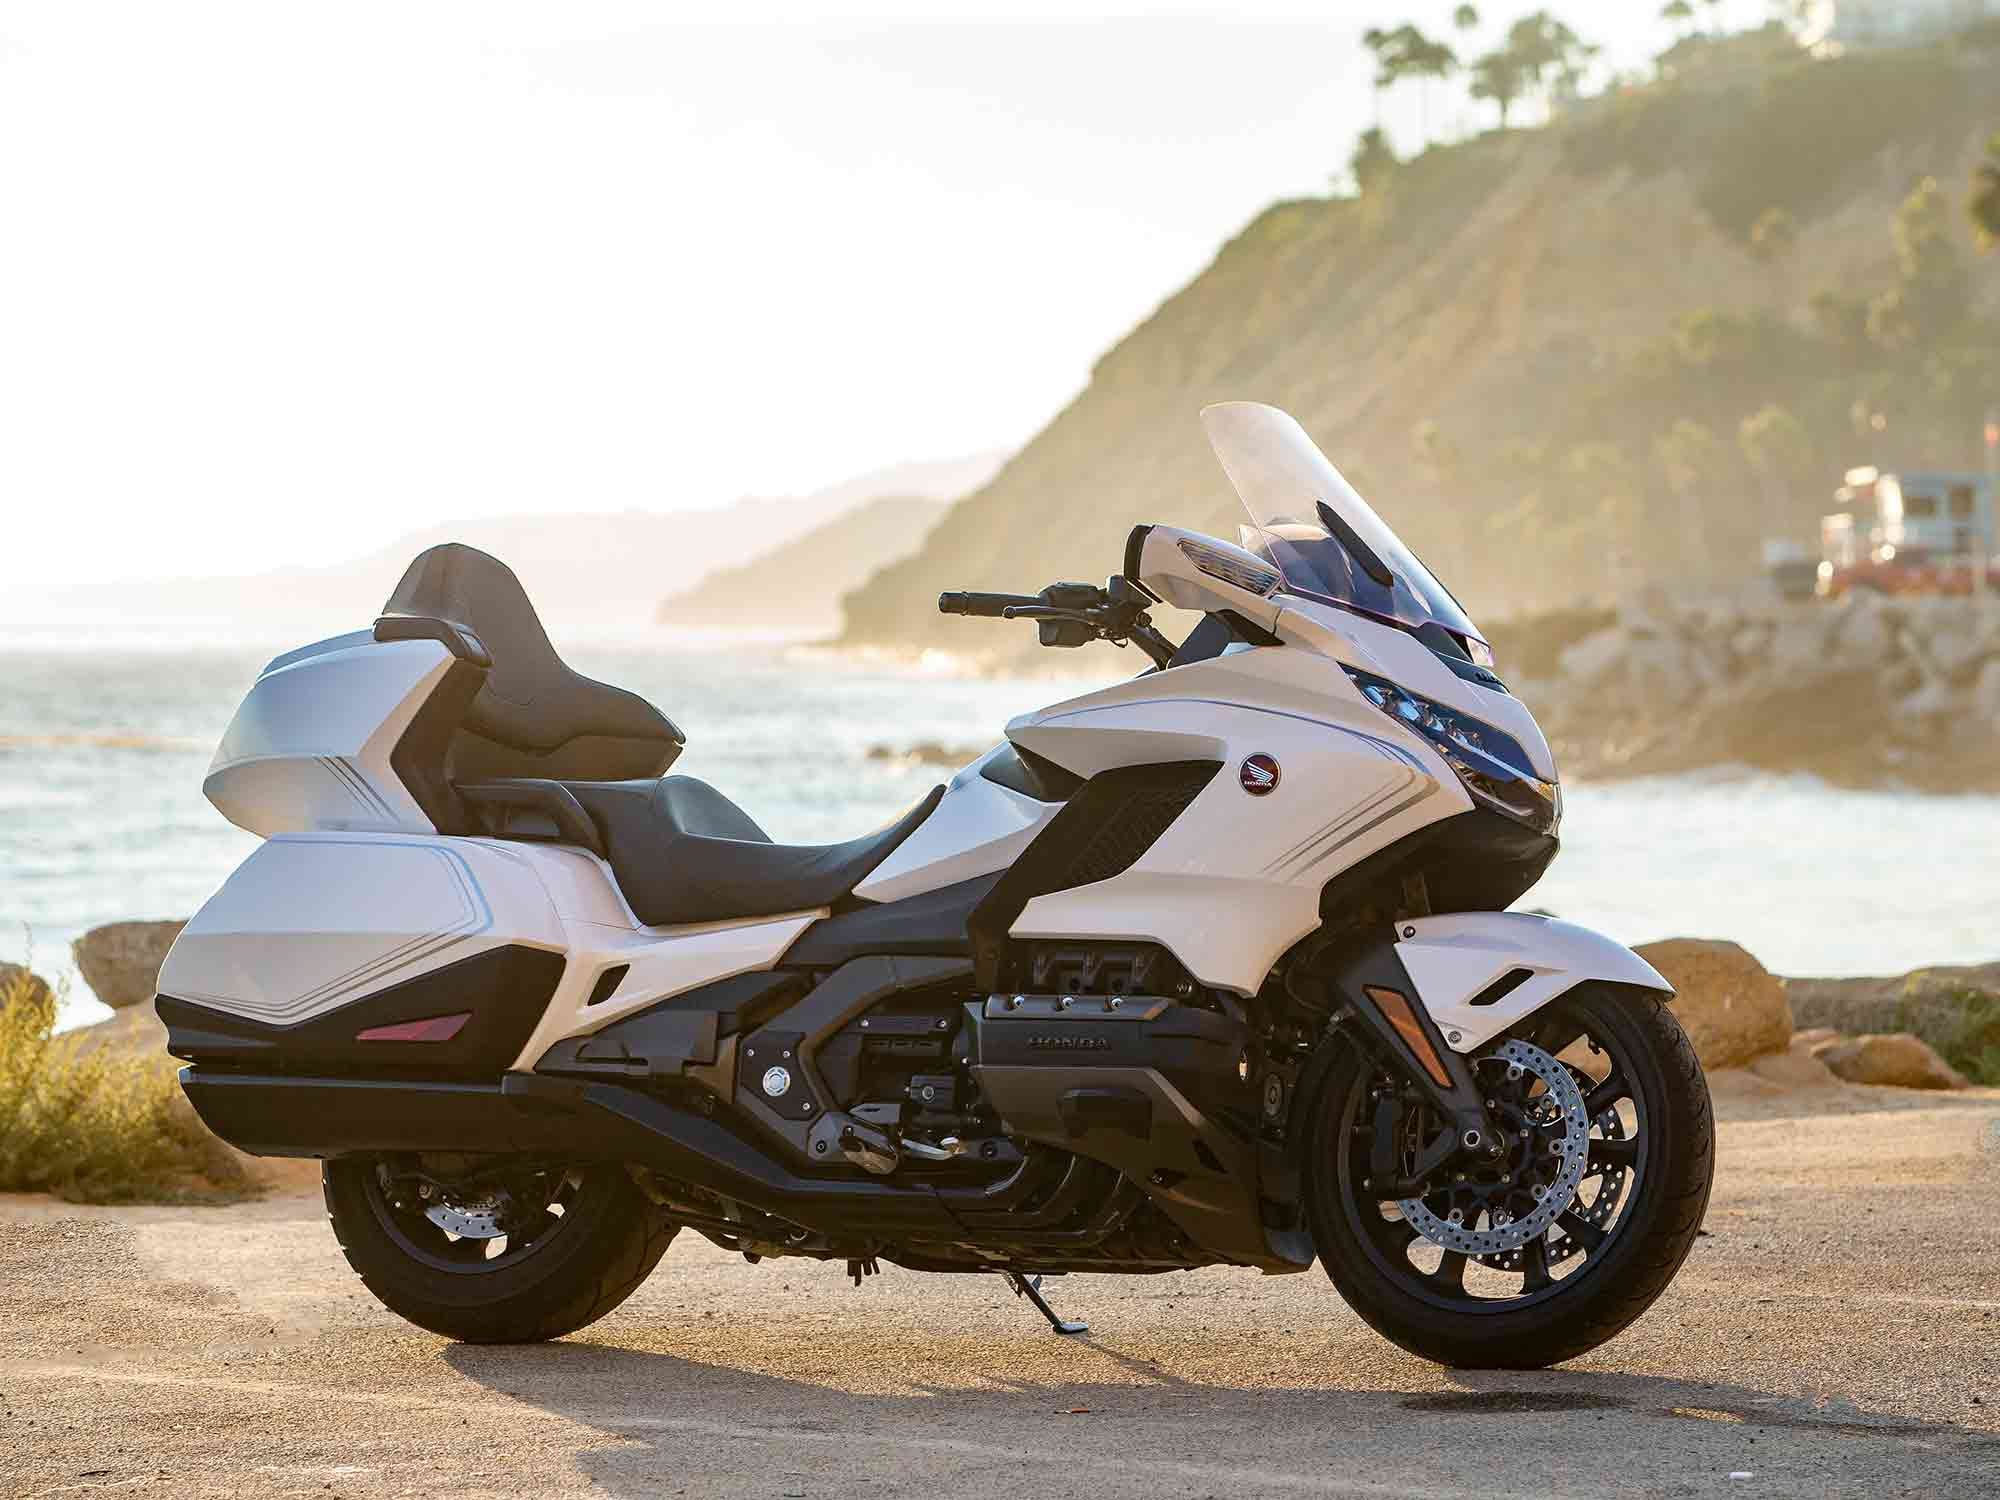 The Honda Gold Wing Tour DCT Automatic is <em>Cycle World</em>’s Best Touring Bike for 2020.